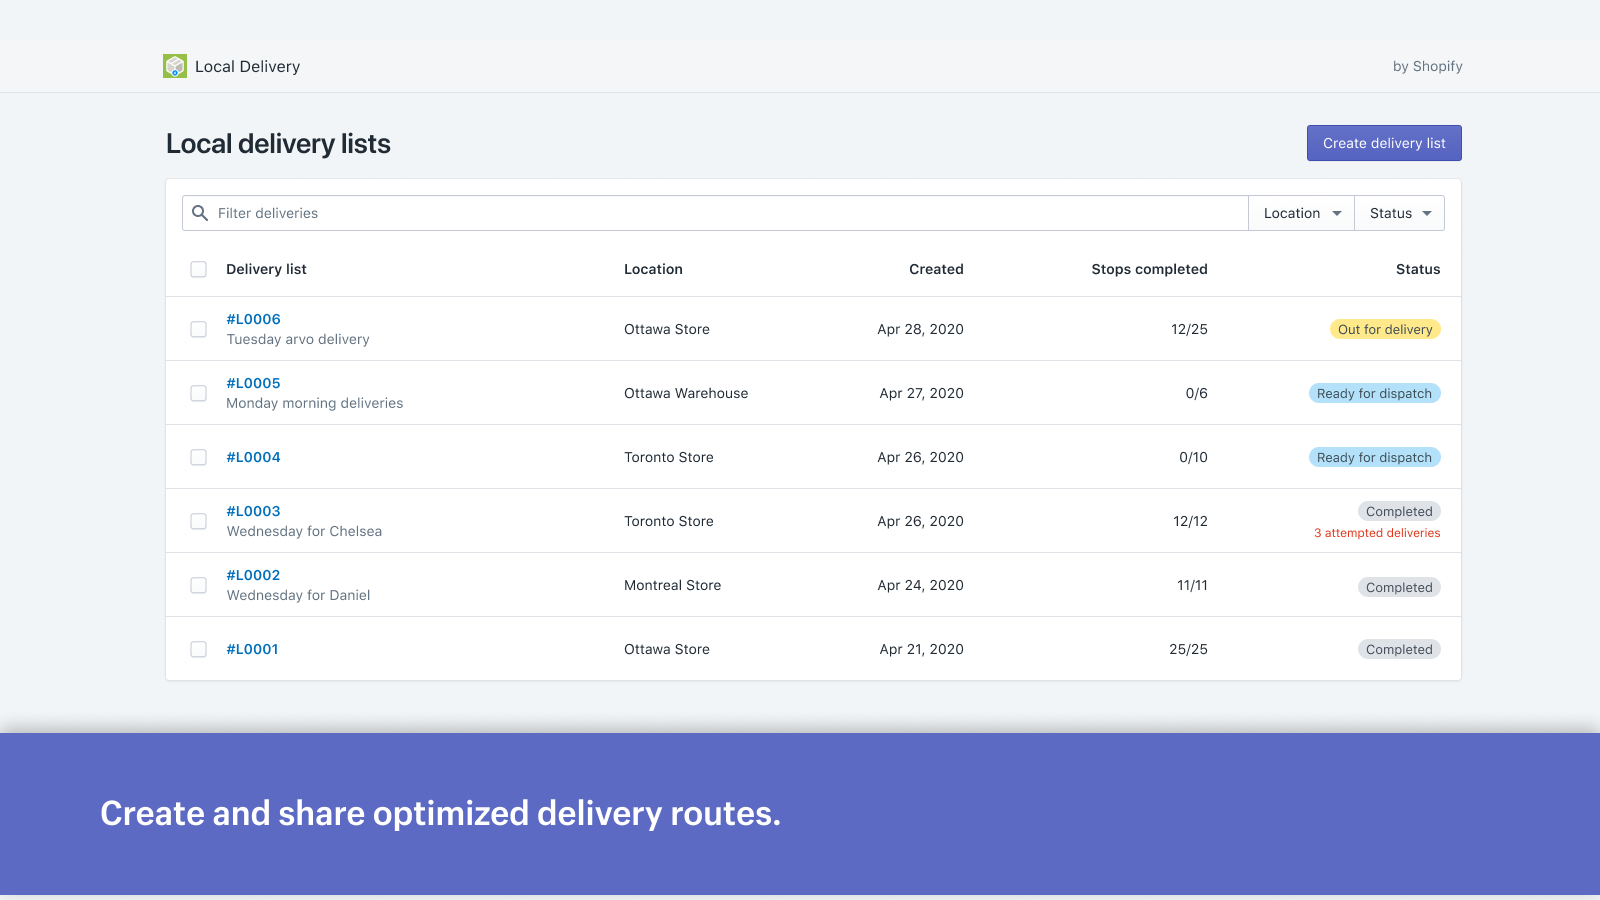 Create and share optimized delivery routes